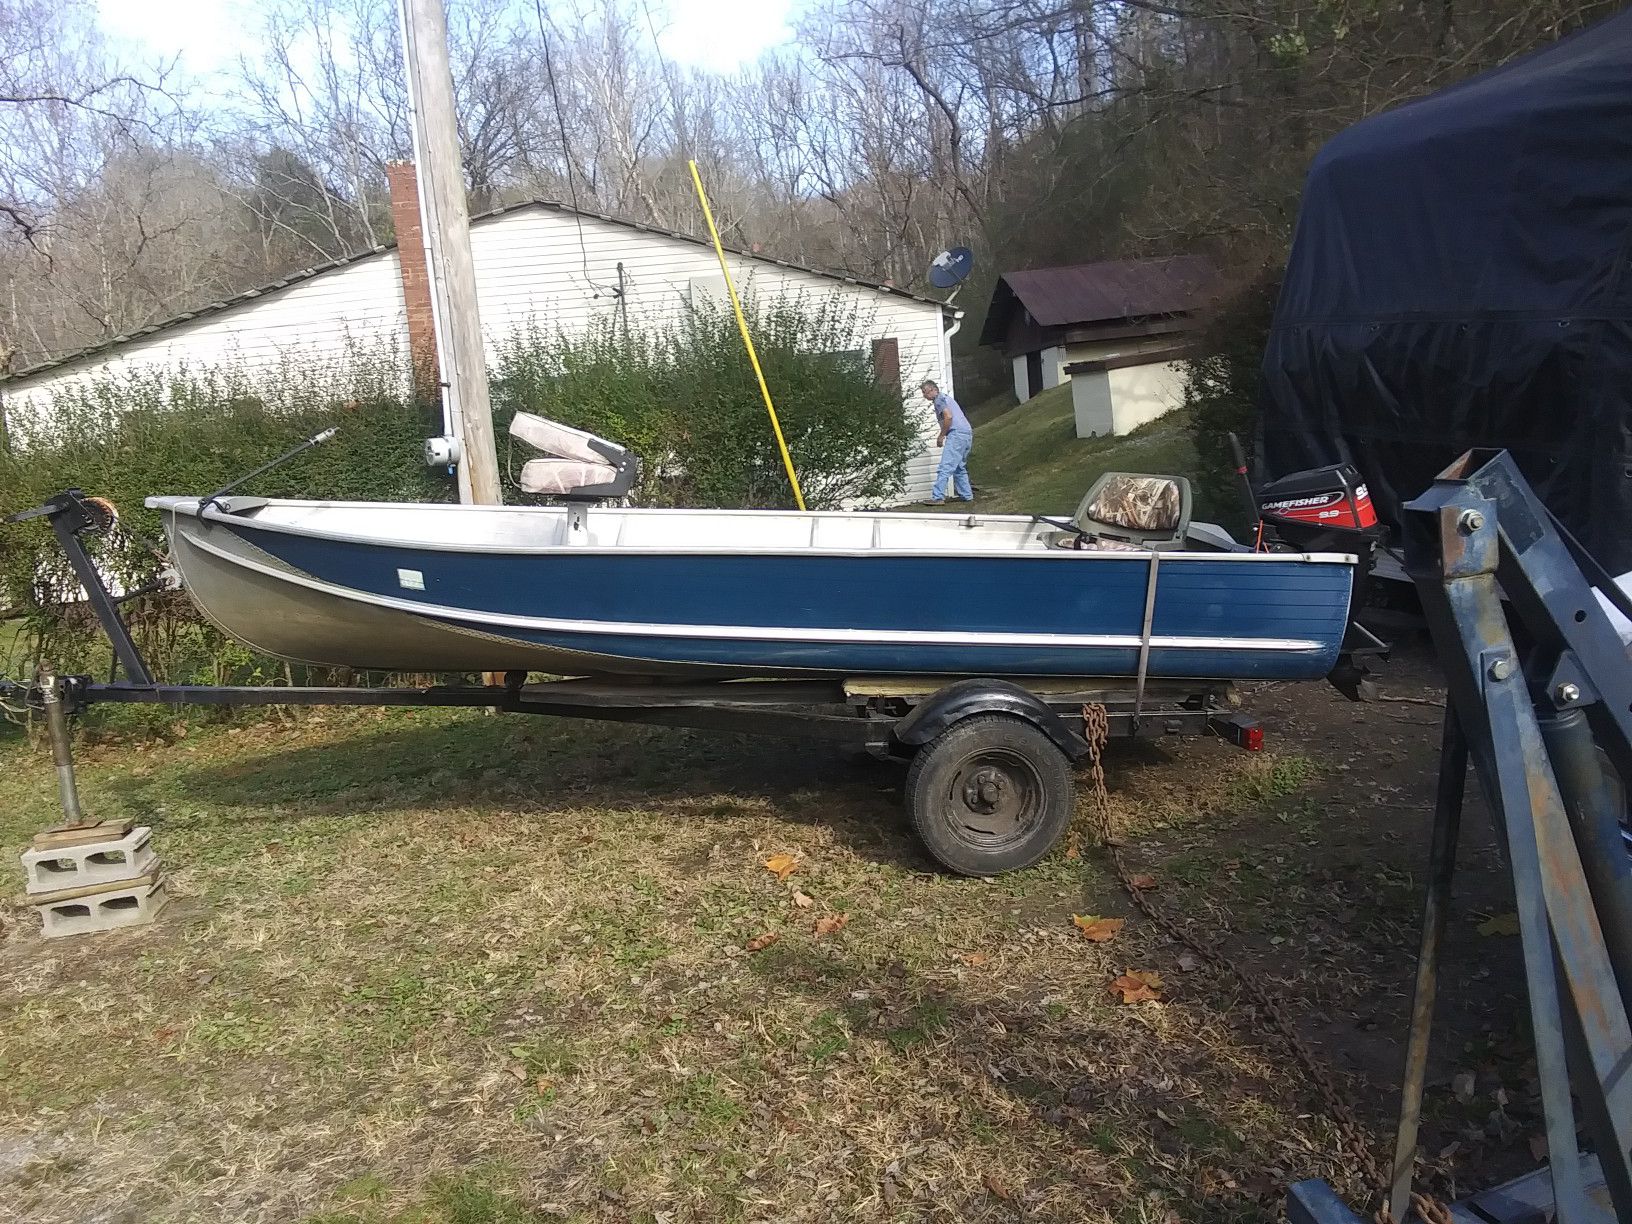 Photo 16 ft albumin boat 3 new tires new fish finder new motor good tralor and Jack